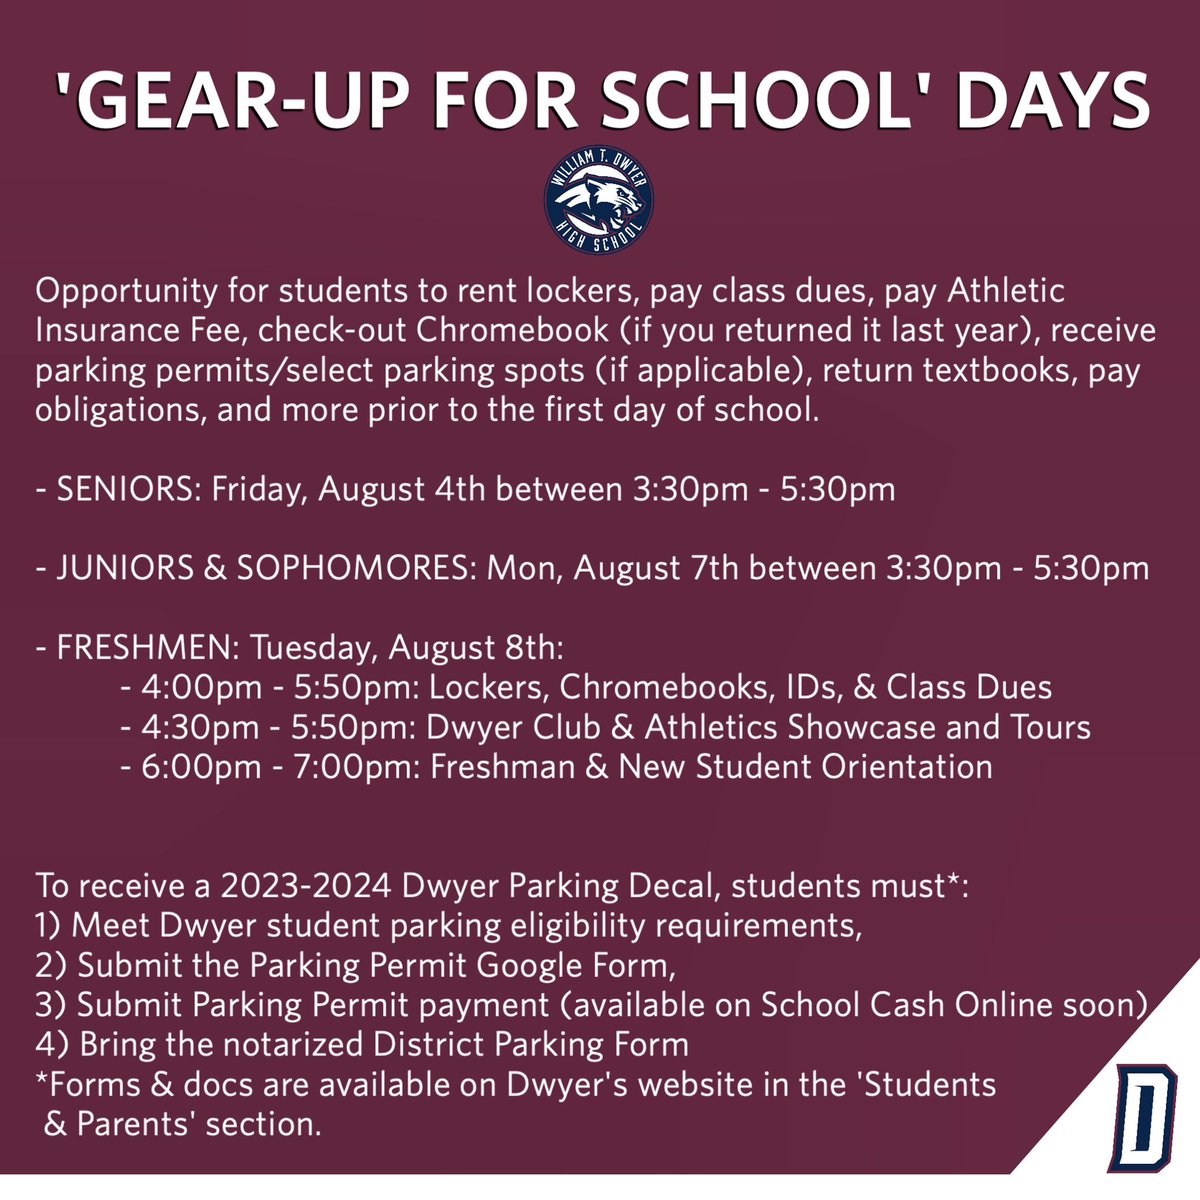 Save the dates for our 'Gear-Up for School Days'! - These days are optional, & all of the items will be available to students when school begins. - To receive a parking permit, students must meet eligibility reqs, & complete the req forms (Parking info & forms link is in our bio)